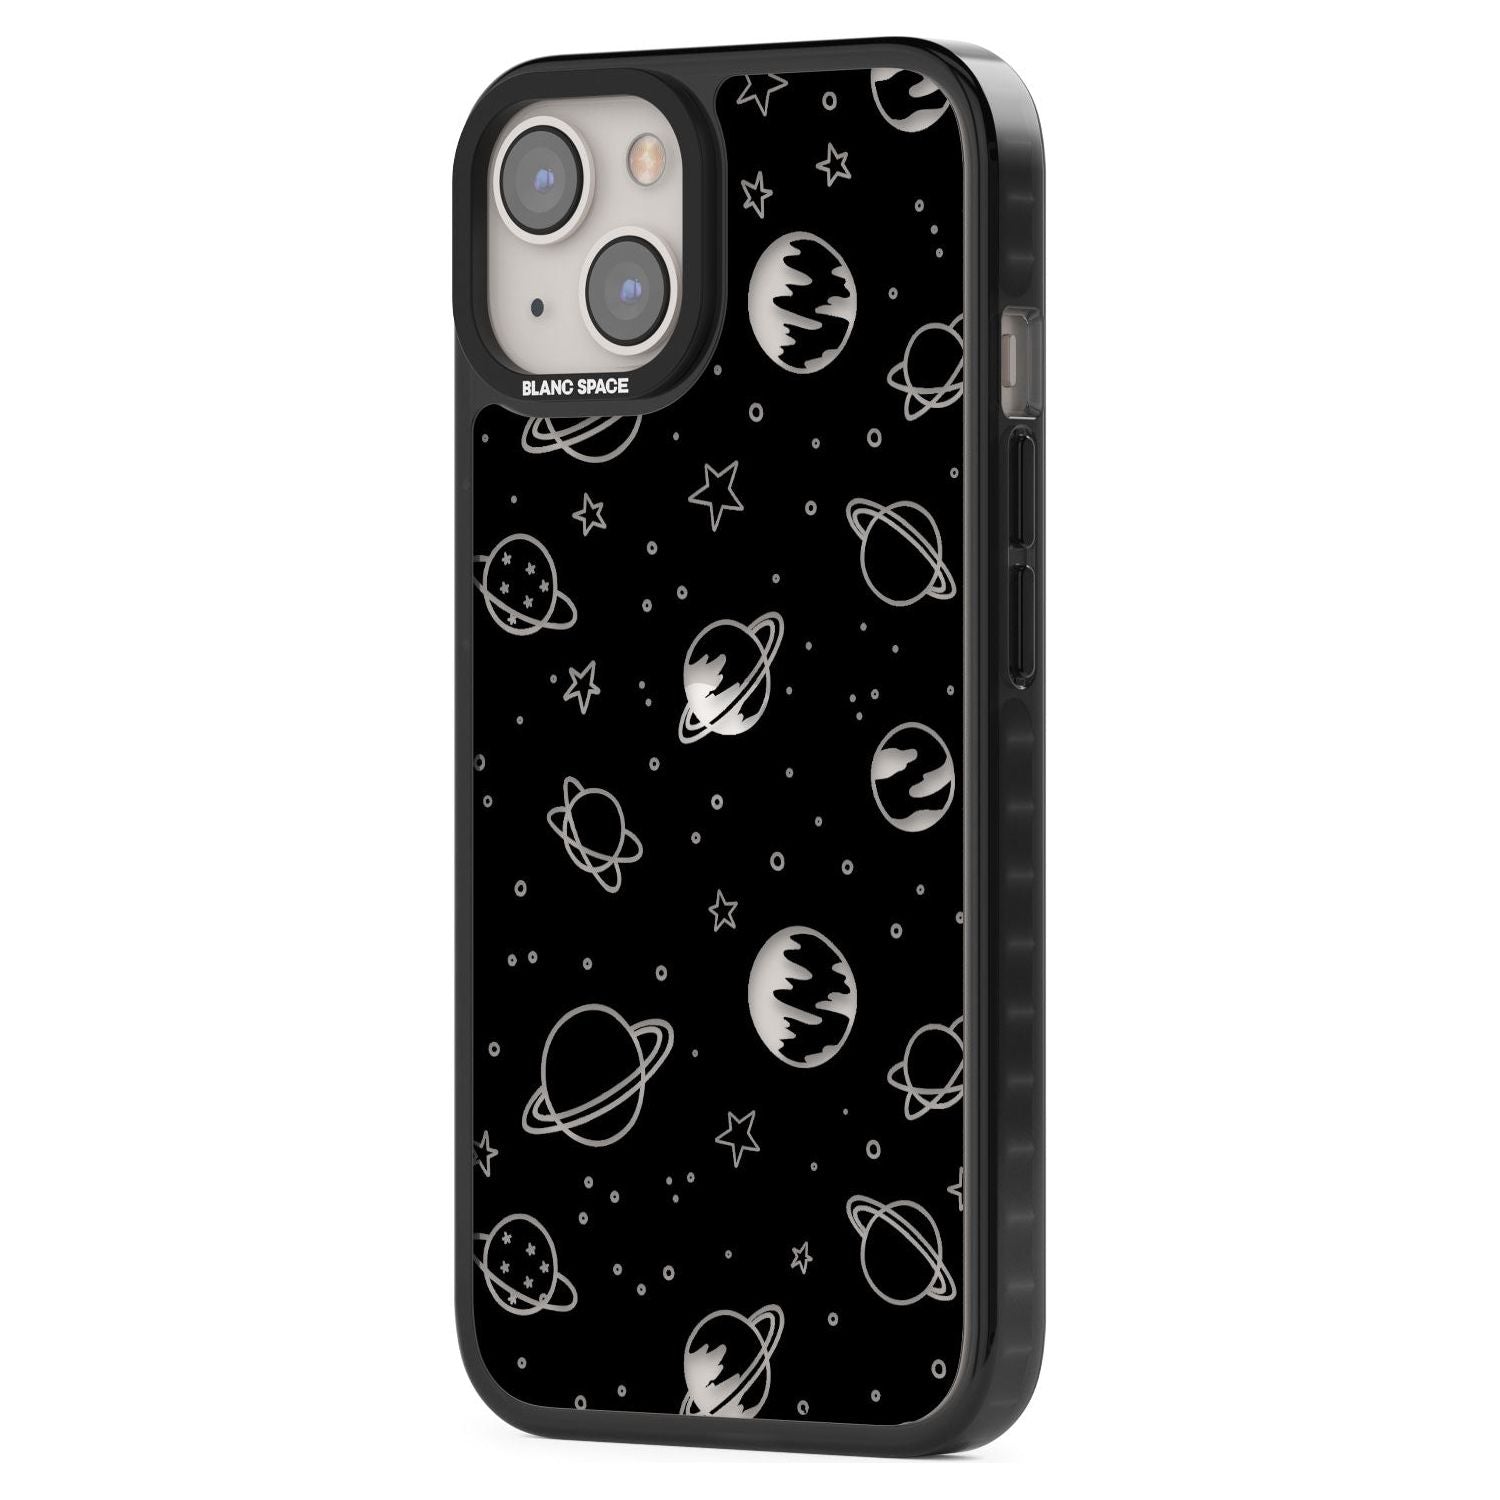 Cosmic Outer Space Design Clear on Black Phone Case iPhone 15 Pro Max / Black Impact Case,iPhone 15 Plus / Black Impact Case,iPhone 15 Pro / Black Impact Case,iPhone 15 / Black Impact Case,iPhone 15 Pro Max / Impact Case,iPhone 15 Plus / Impact Case,iPhone 15 Pro / Impact Case,iPhone 15 / Impact Case,iPhone 15 Pro Max / Magsafe Black Impact Case,iPhone 15 Plus / Magsafe Black Impact Case,iPhone 15 Pro / Magsafe Black Impact Case,iPhone 15 / Magsafe Black Impact Case,iPhone 14 Pro Max / Black Impact Case,iPh